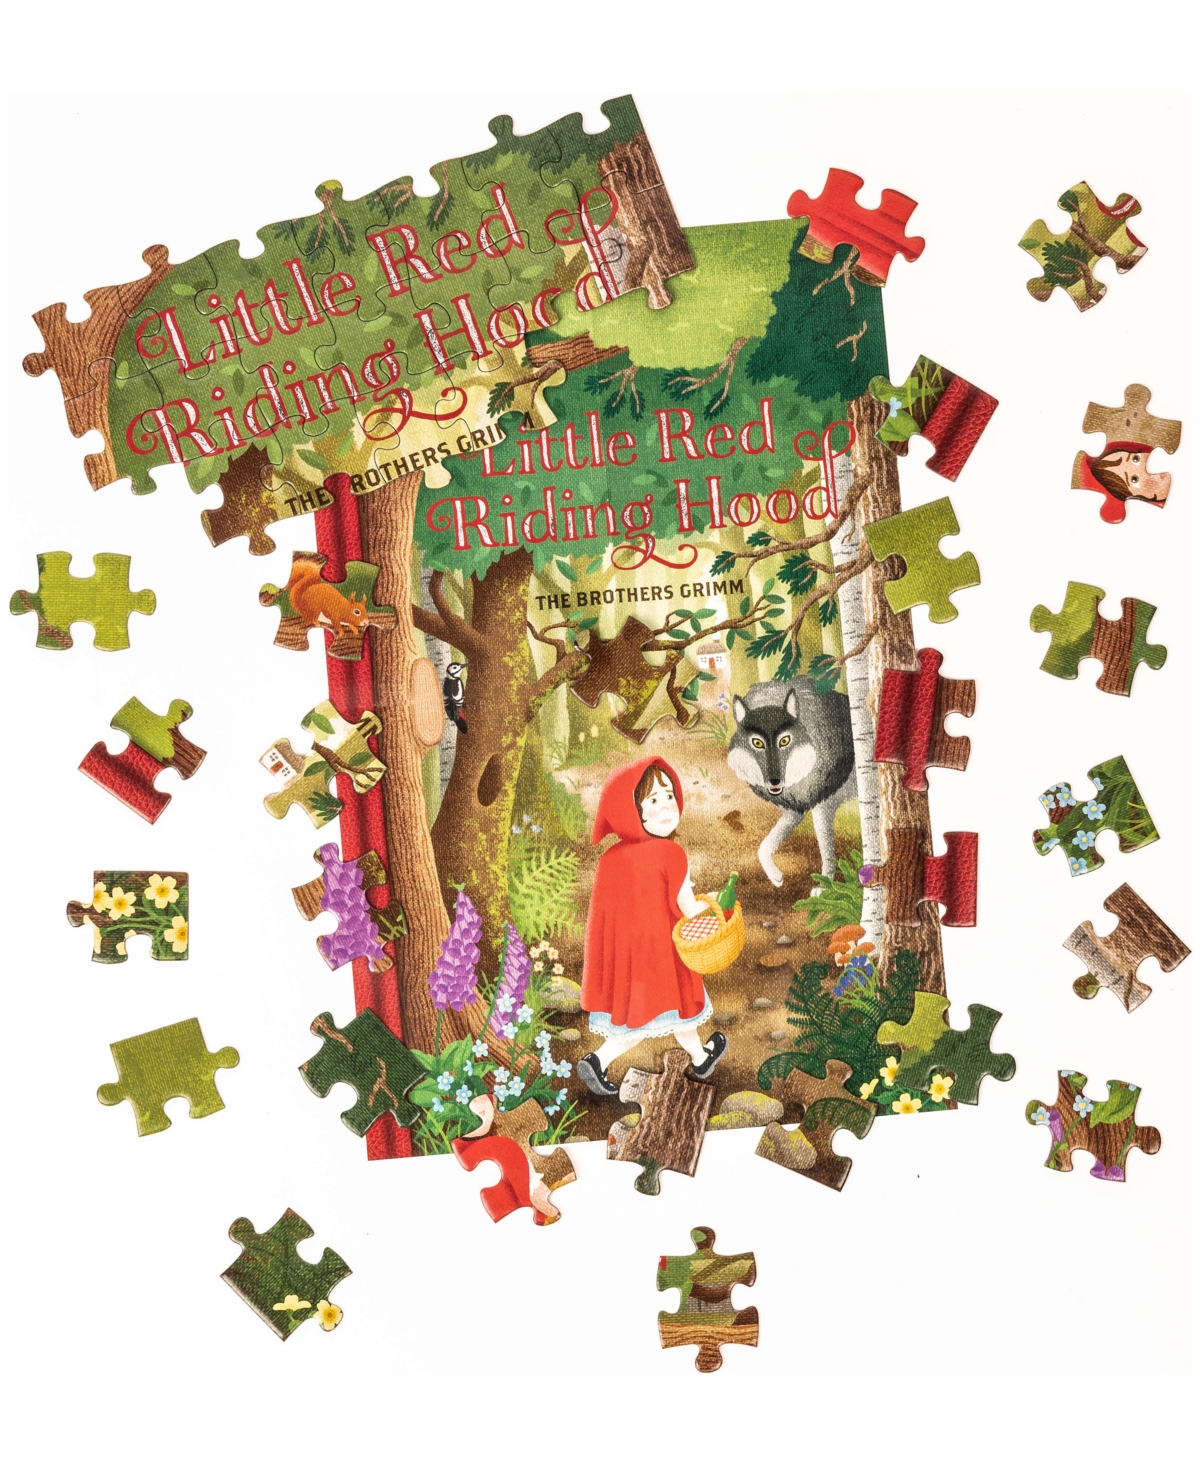 Shop University Games Professor Puzzle The Brothers Grimm's Little Red Riding Hood Double-sided Jigsaw Puzzle, 96 Pieces In No Color